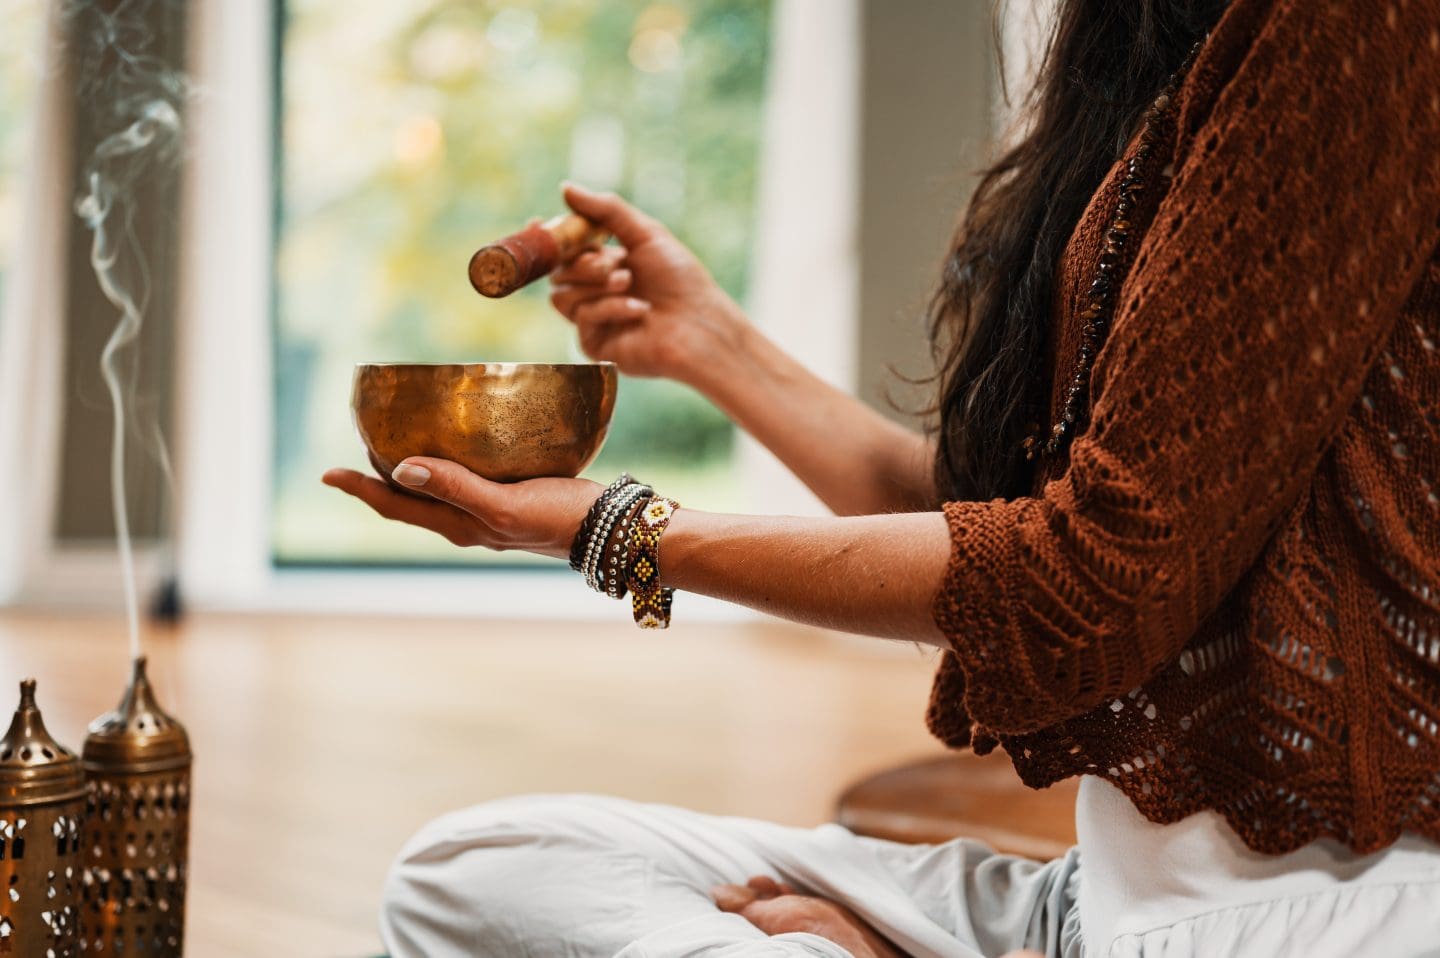 Does Meditation Help with Anxiety